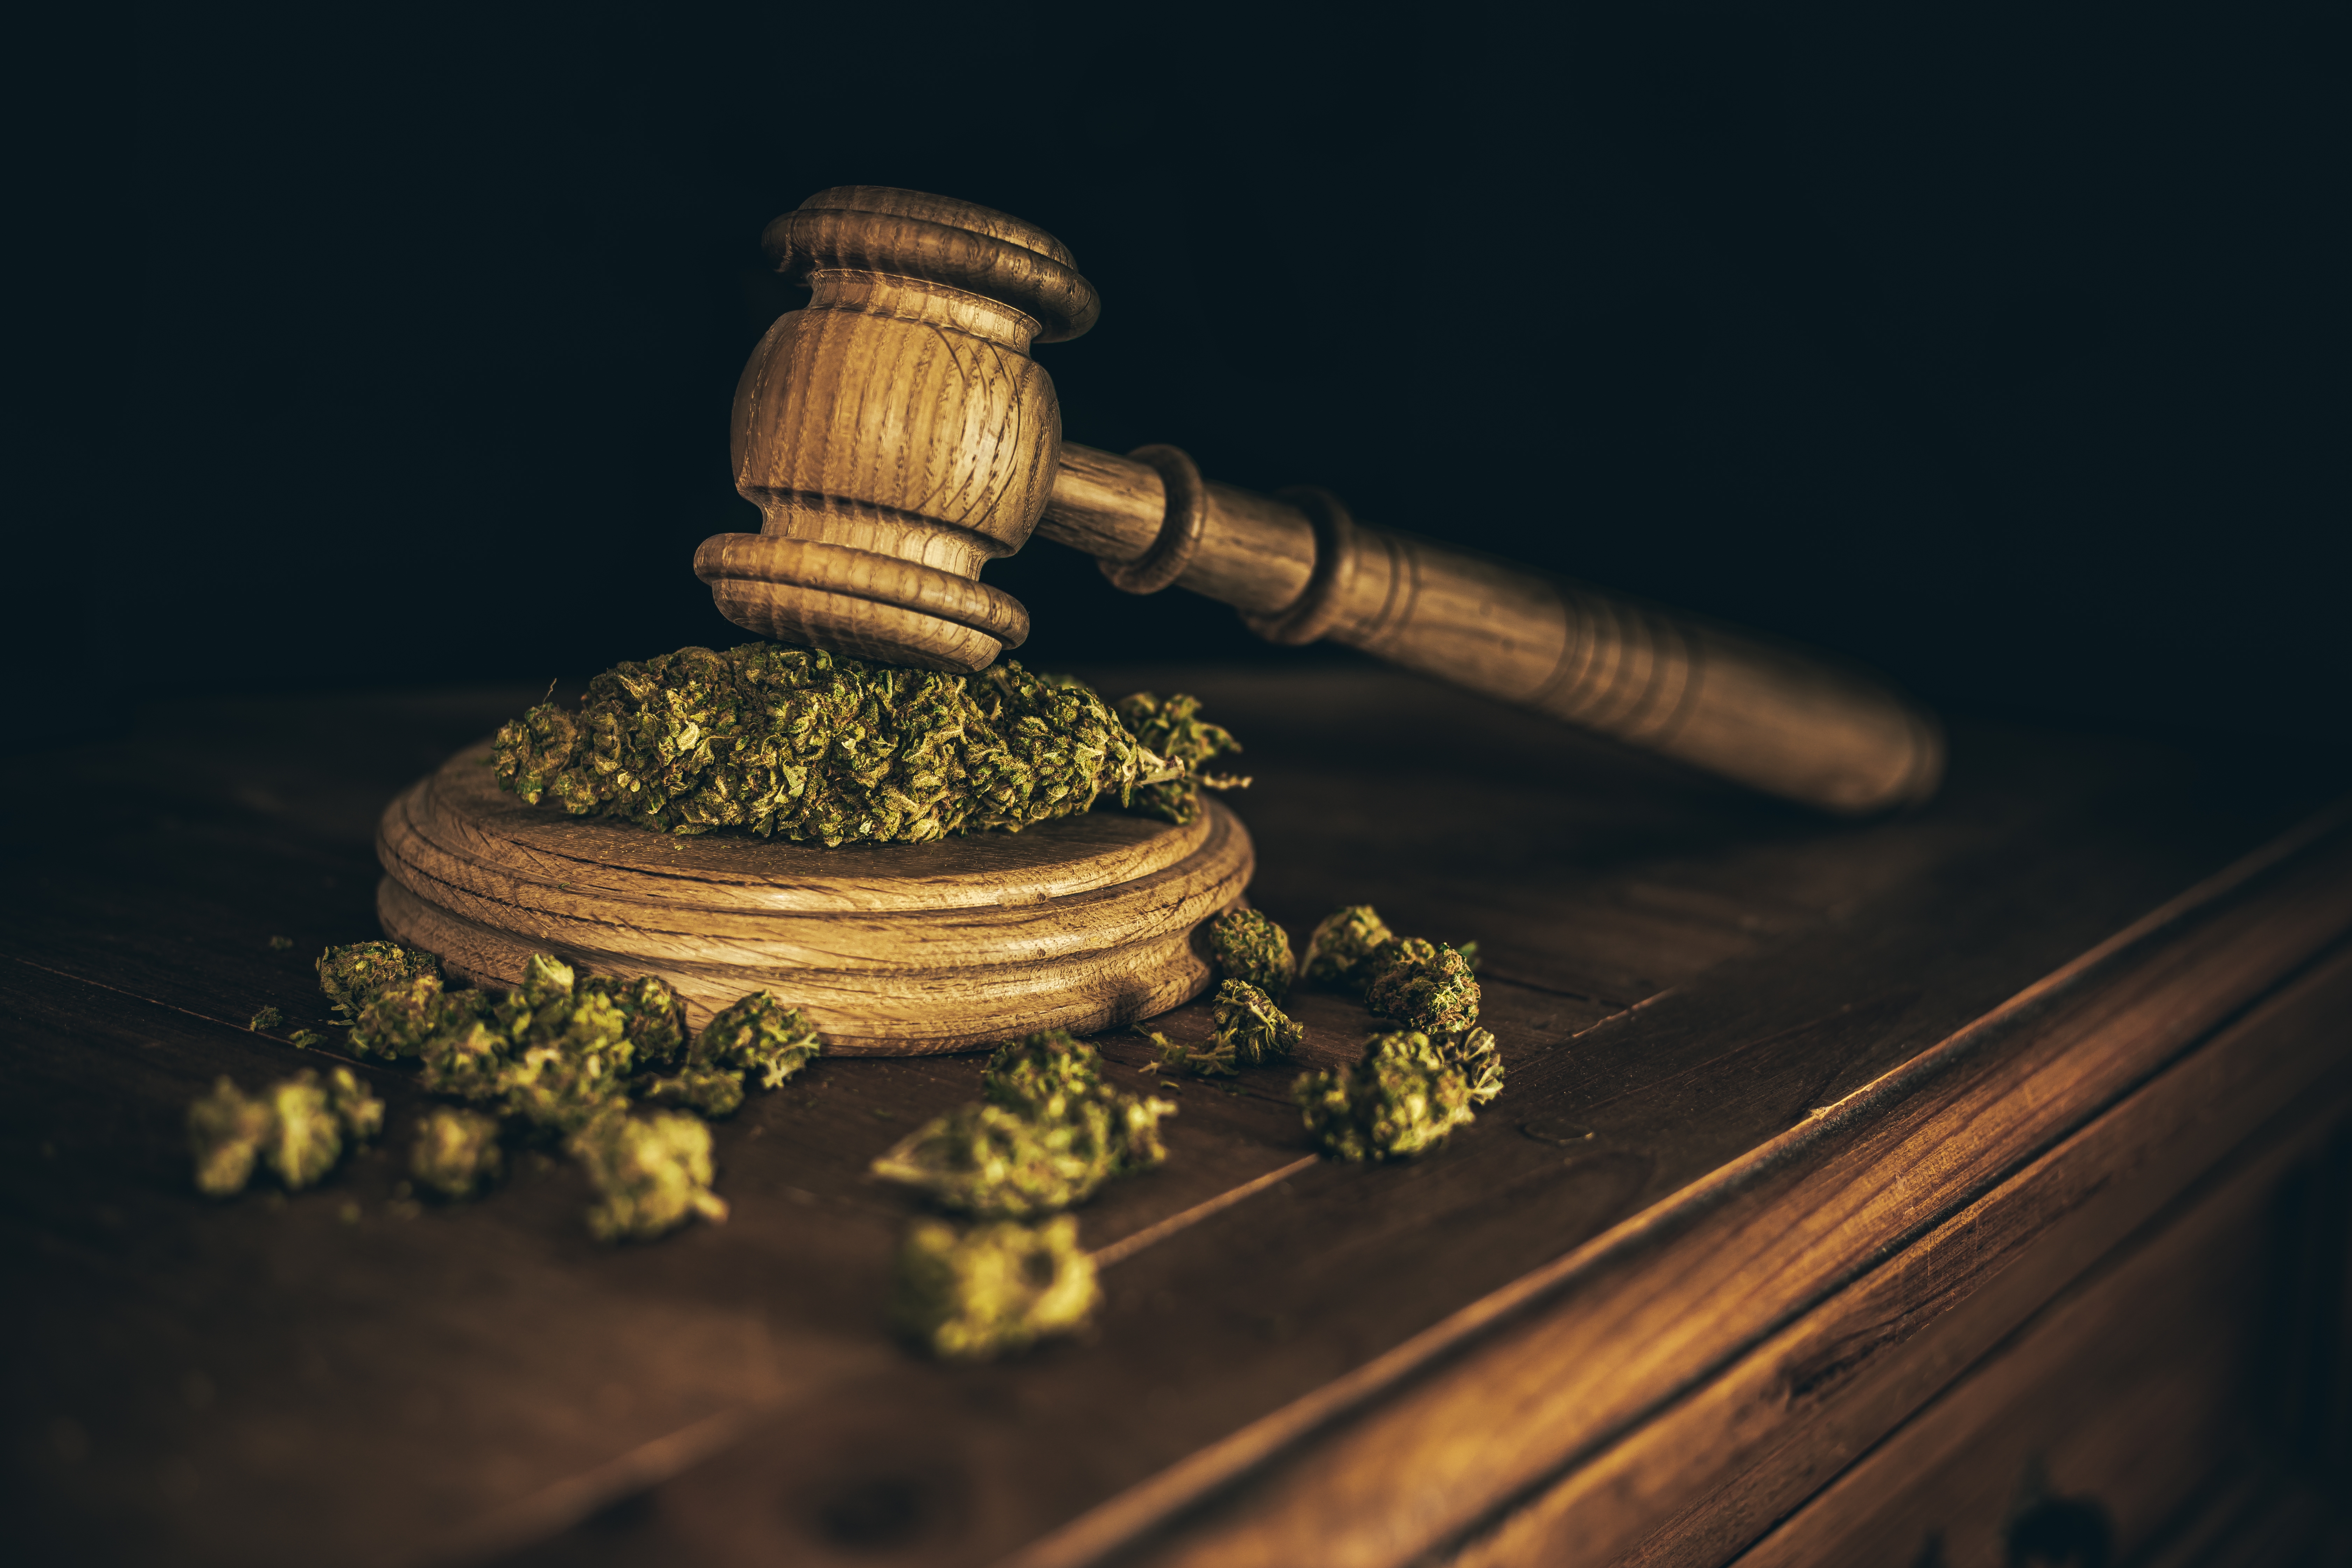 Cannabis buds rest on a wood block with a judge's wooden gavel resting on top.